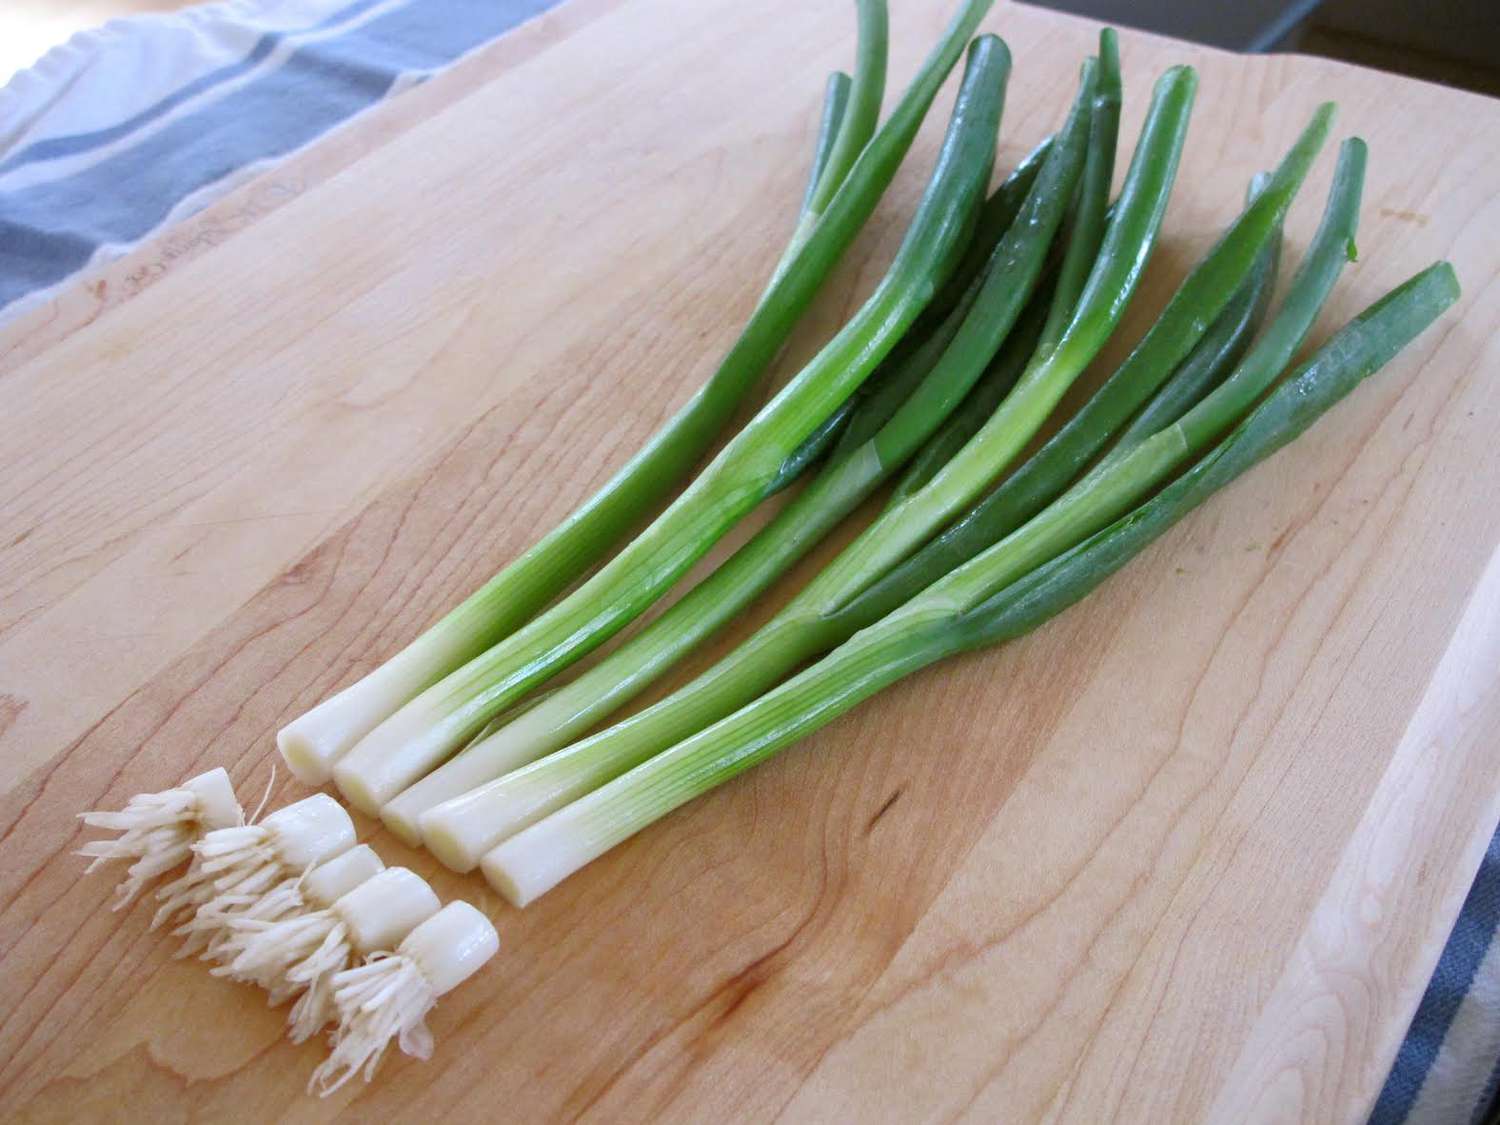 https://recipes.net/wp-content/uploads/2023/10/how-to-cut-green-onion-plant-1696681793.jpg